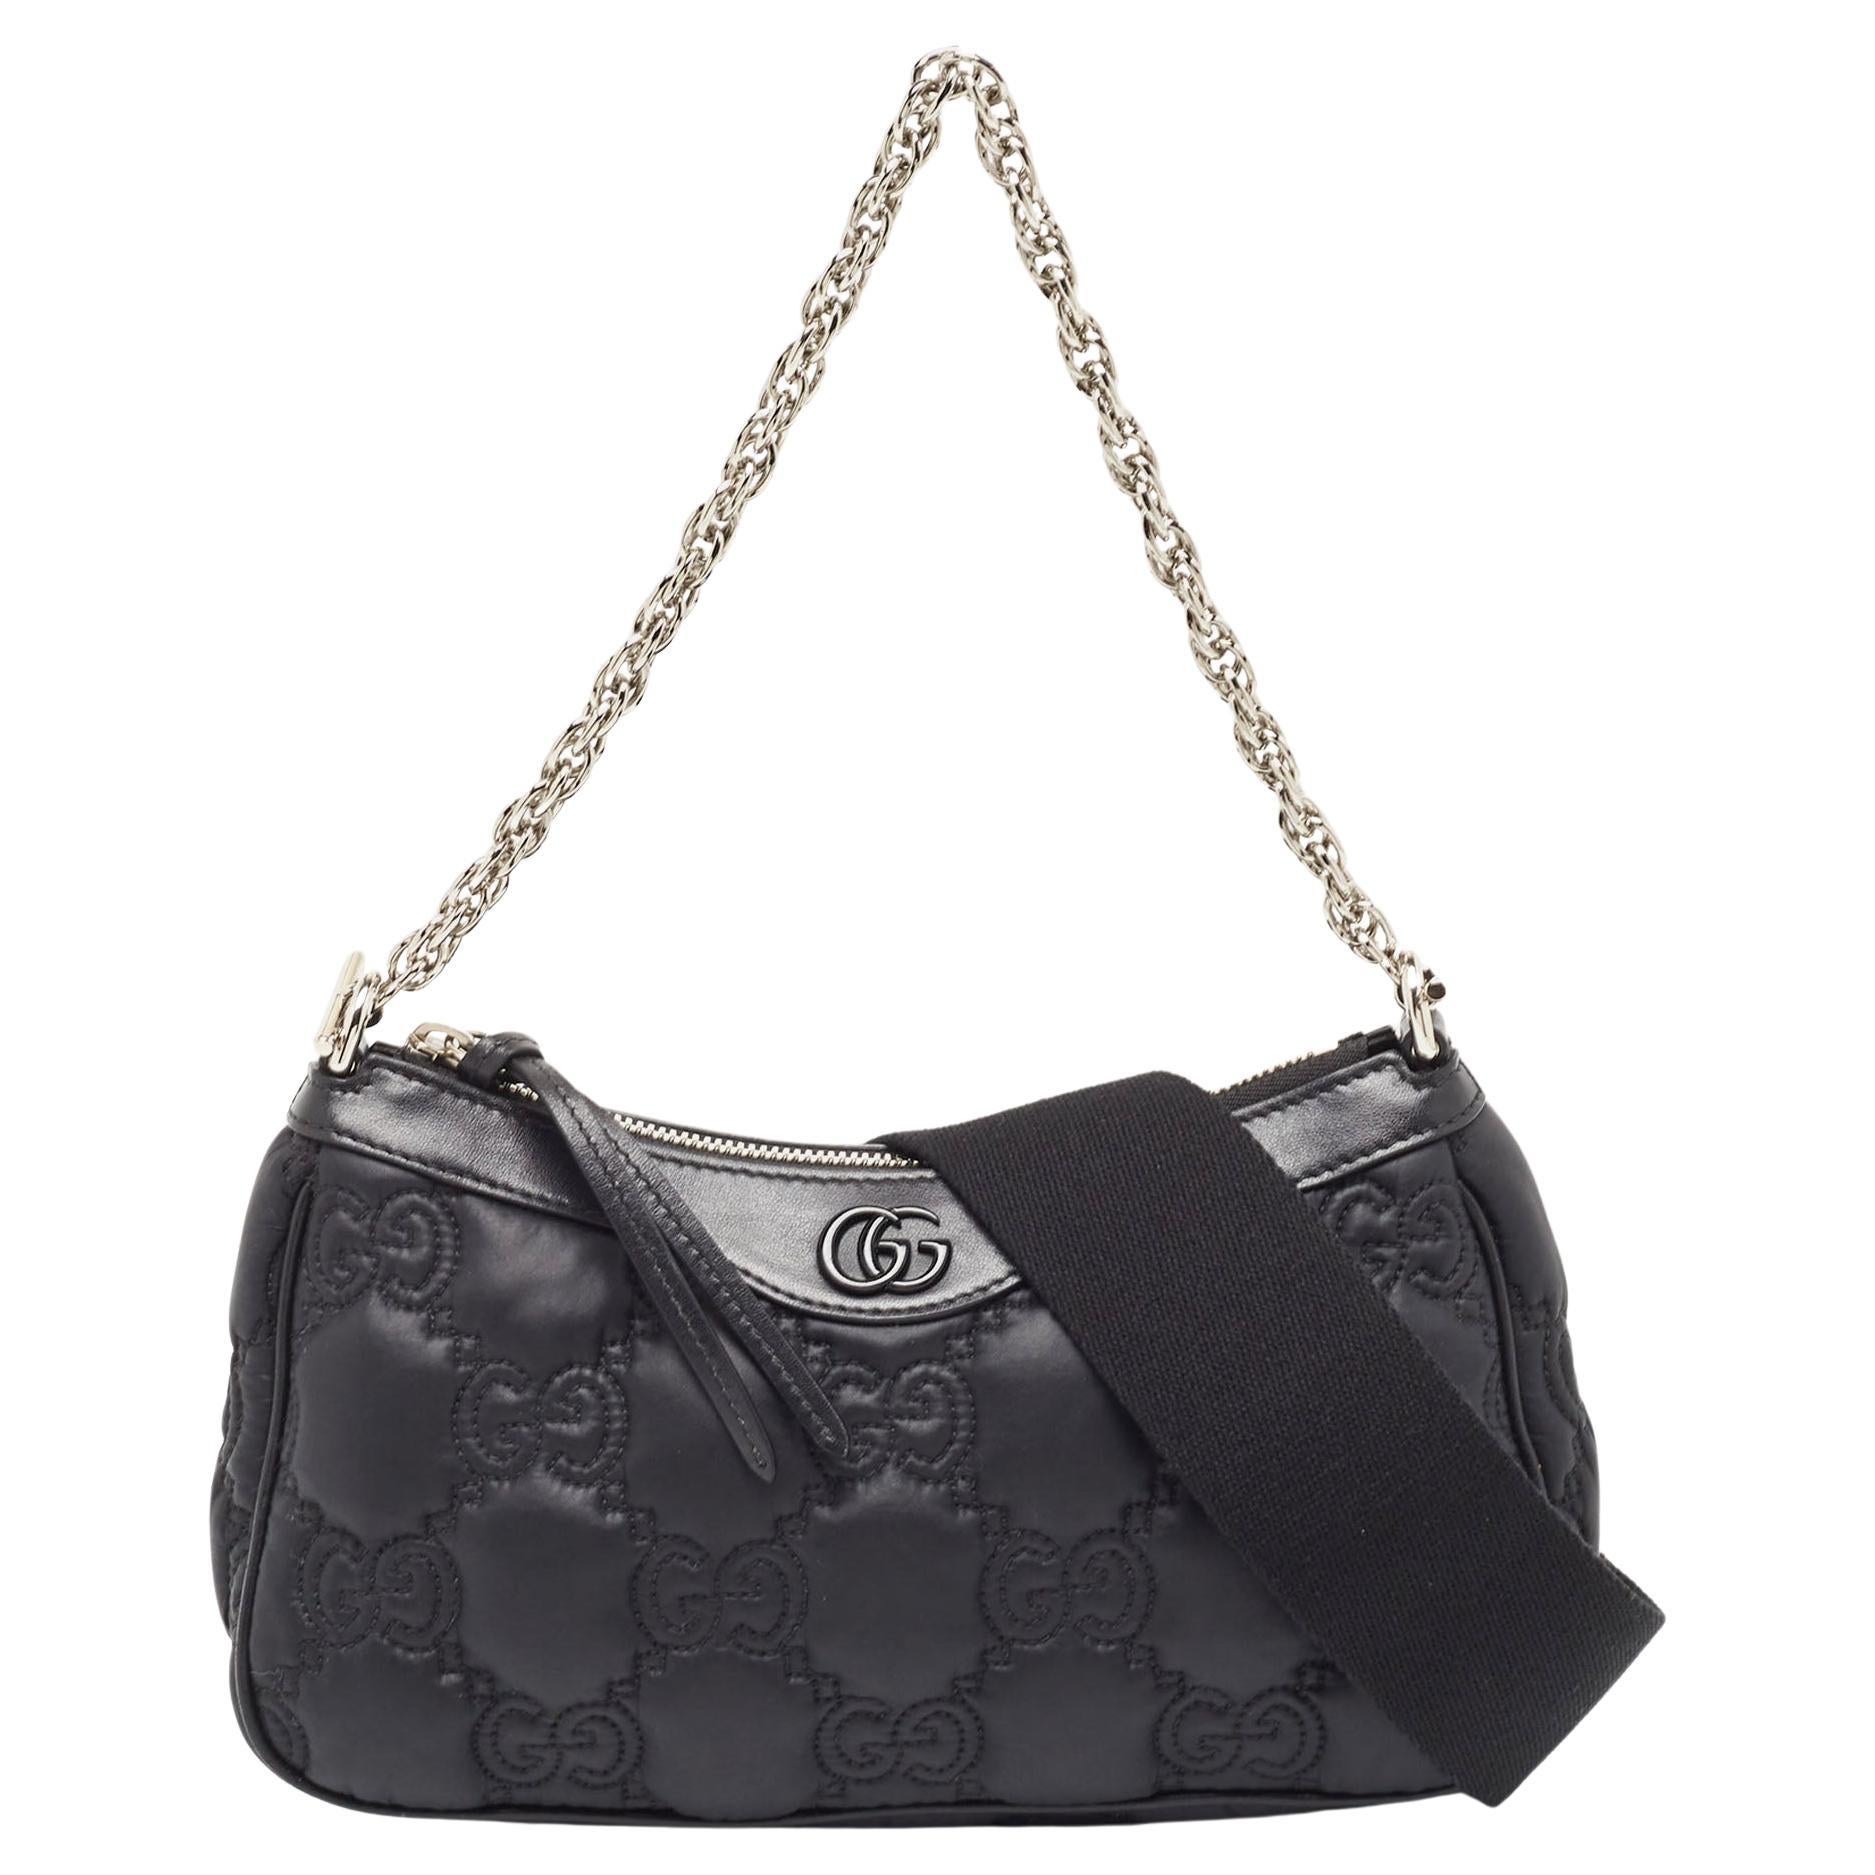 Gucci Black GG Matelassé Satin and Leather Chain Bag For Sale